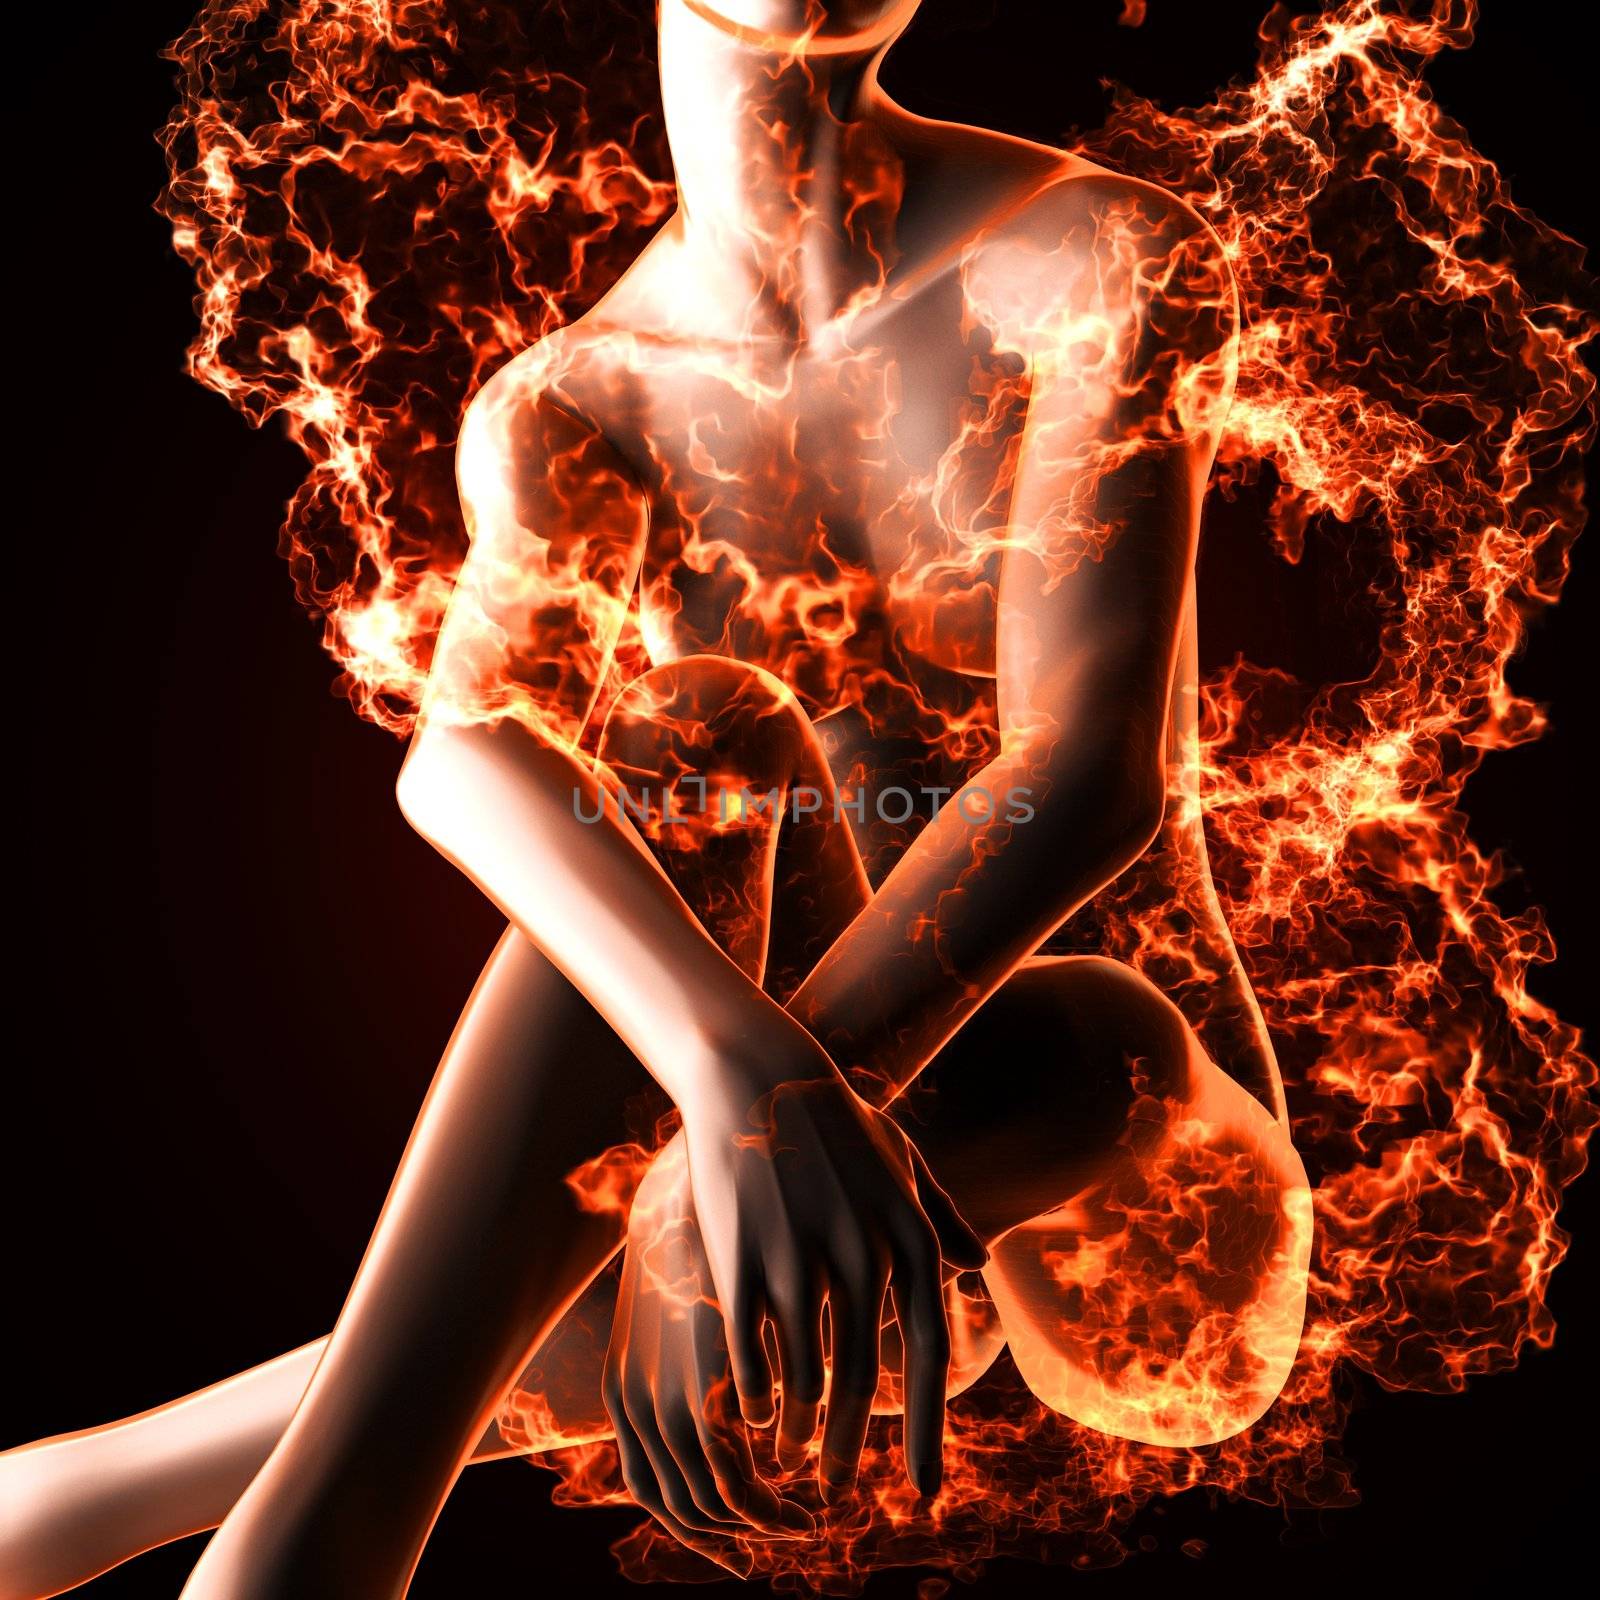 Sexy  woman in fire made in 3d